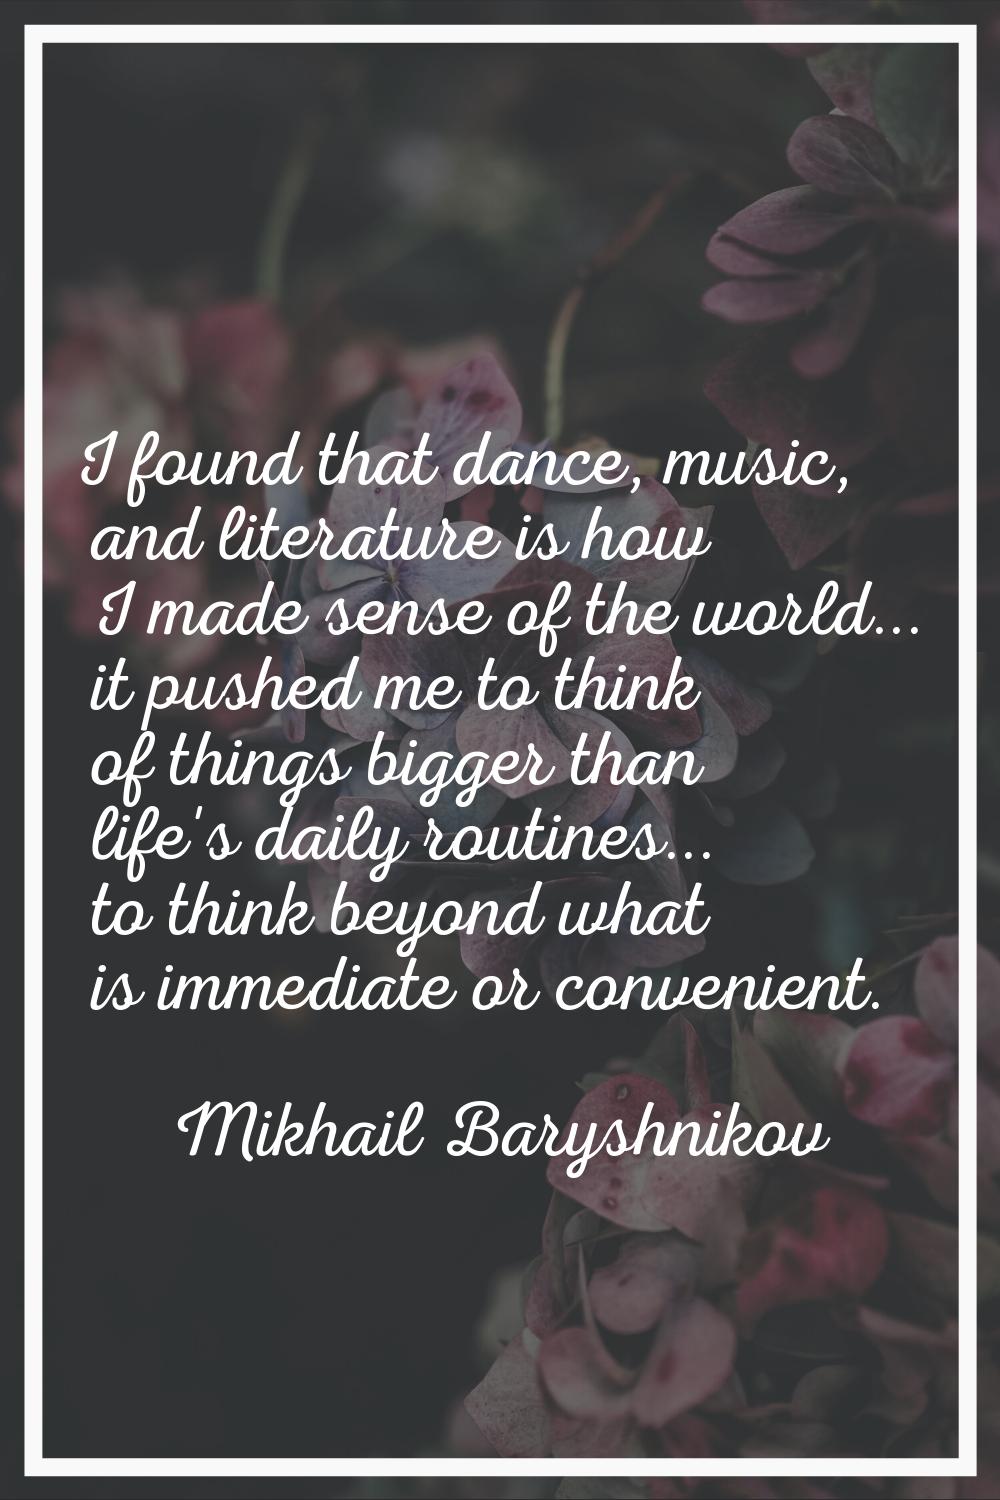 I found that dance, music, and literature is how I made sense of the world... it pushed me to think